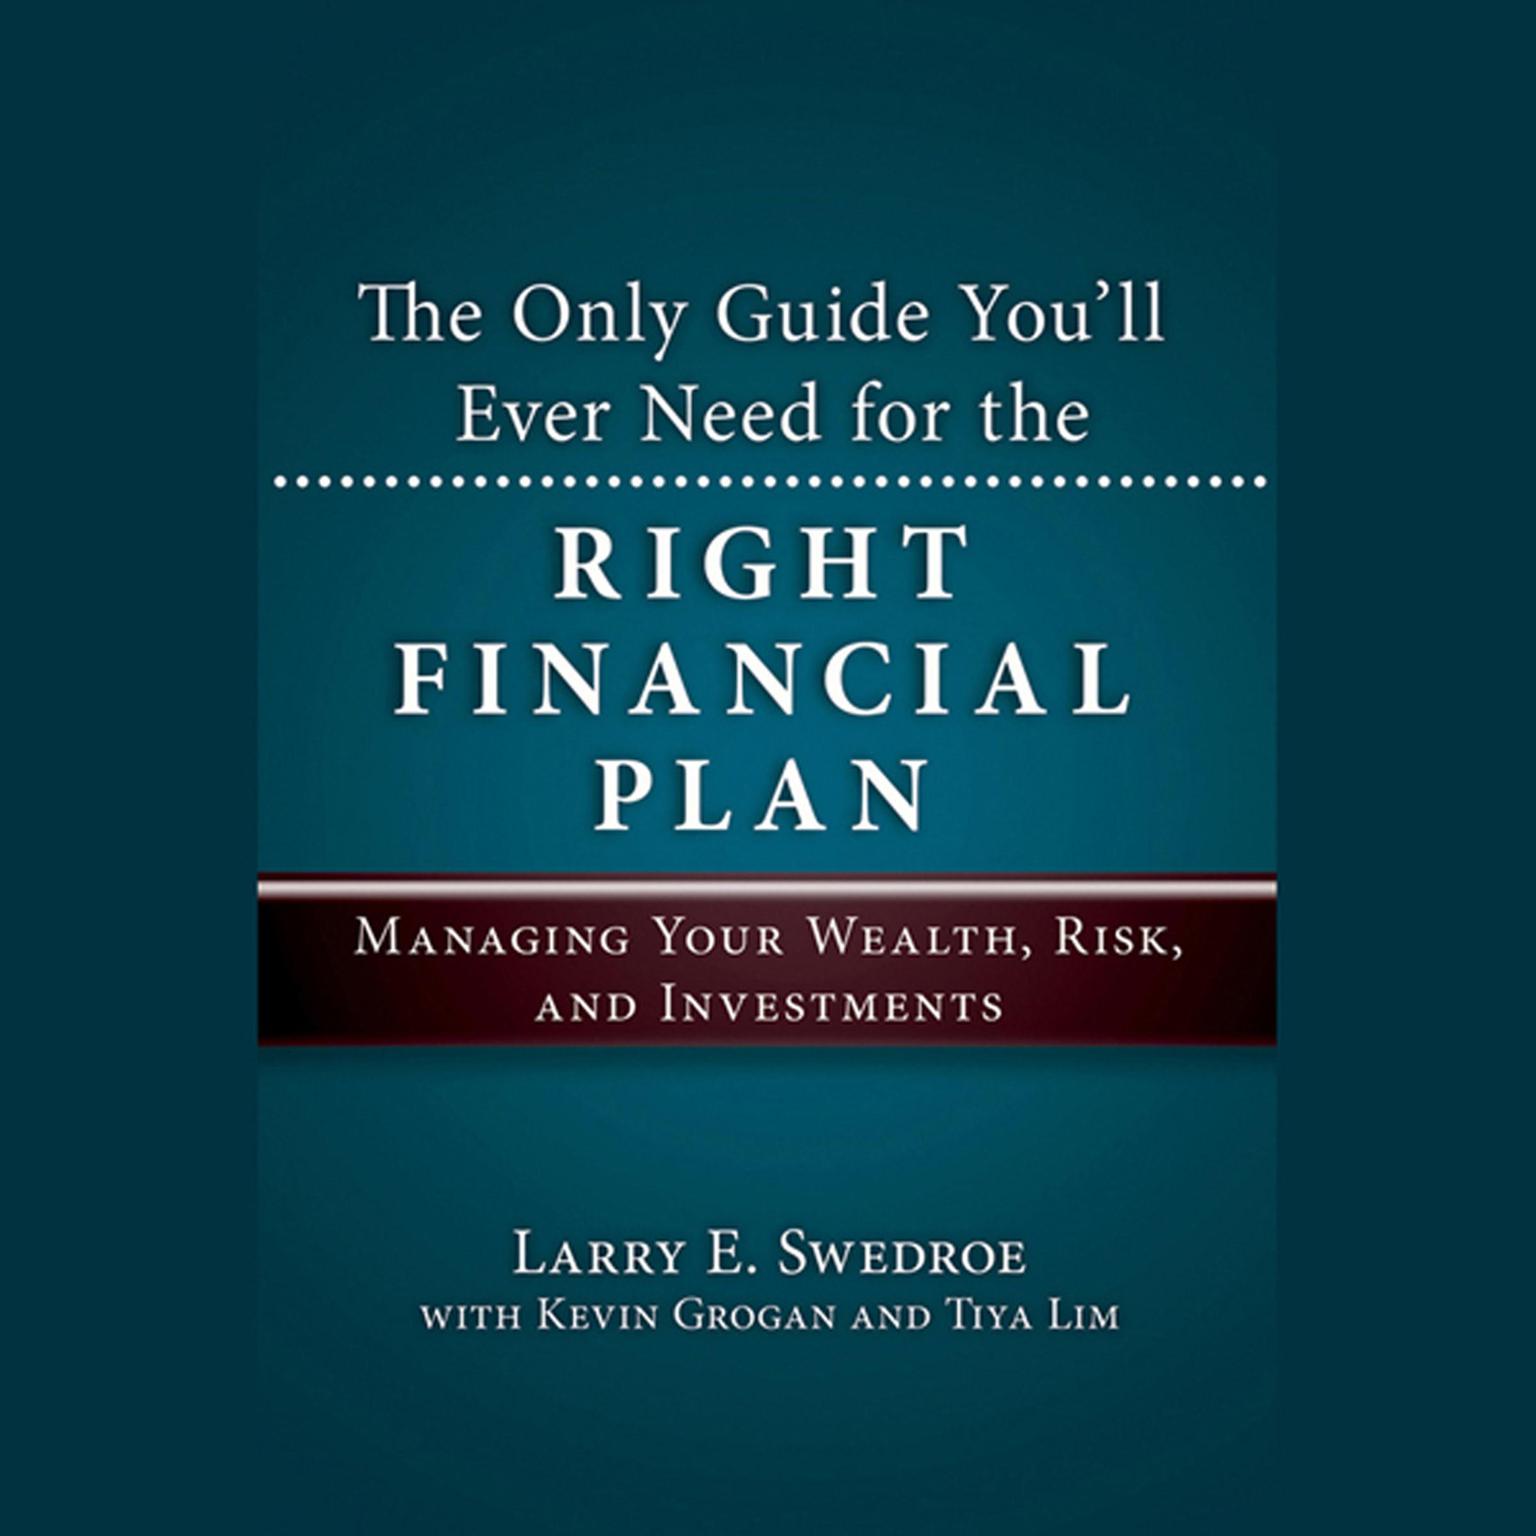 The Only Guide Youll Ever Need for the Right Financial Plan: Managing Your Wealth, Risk, and Investments Audiobook, by Larry E. Swedroe